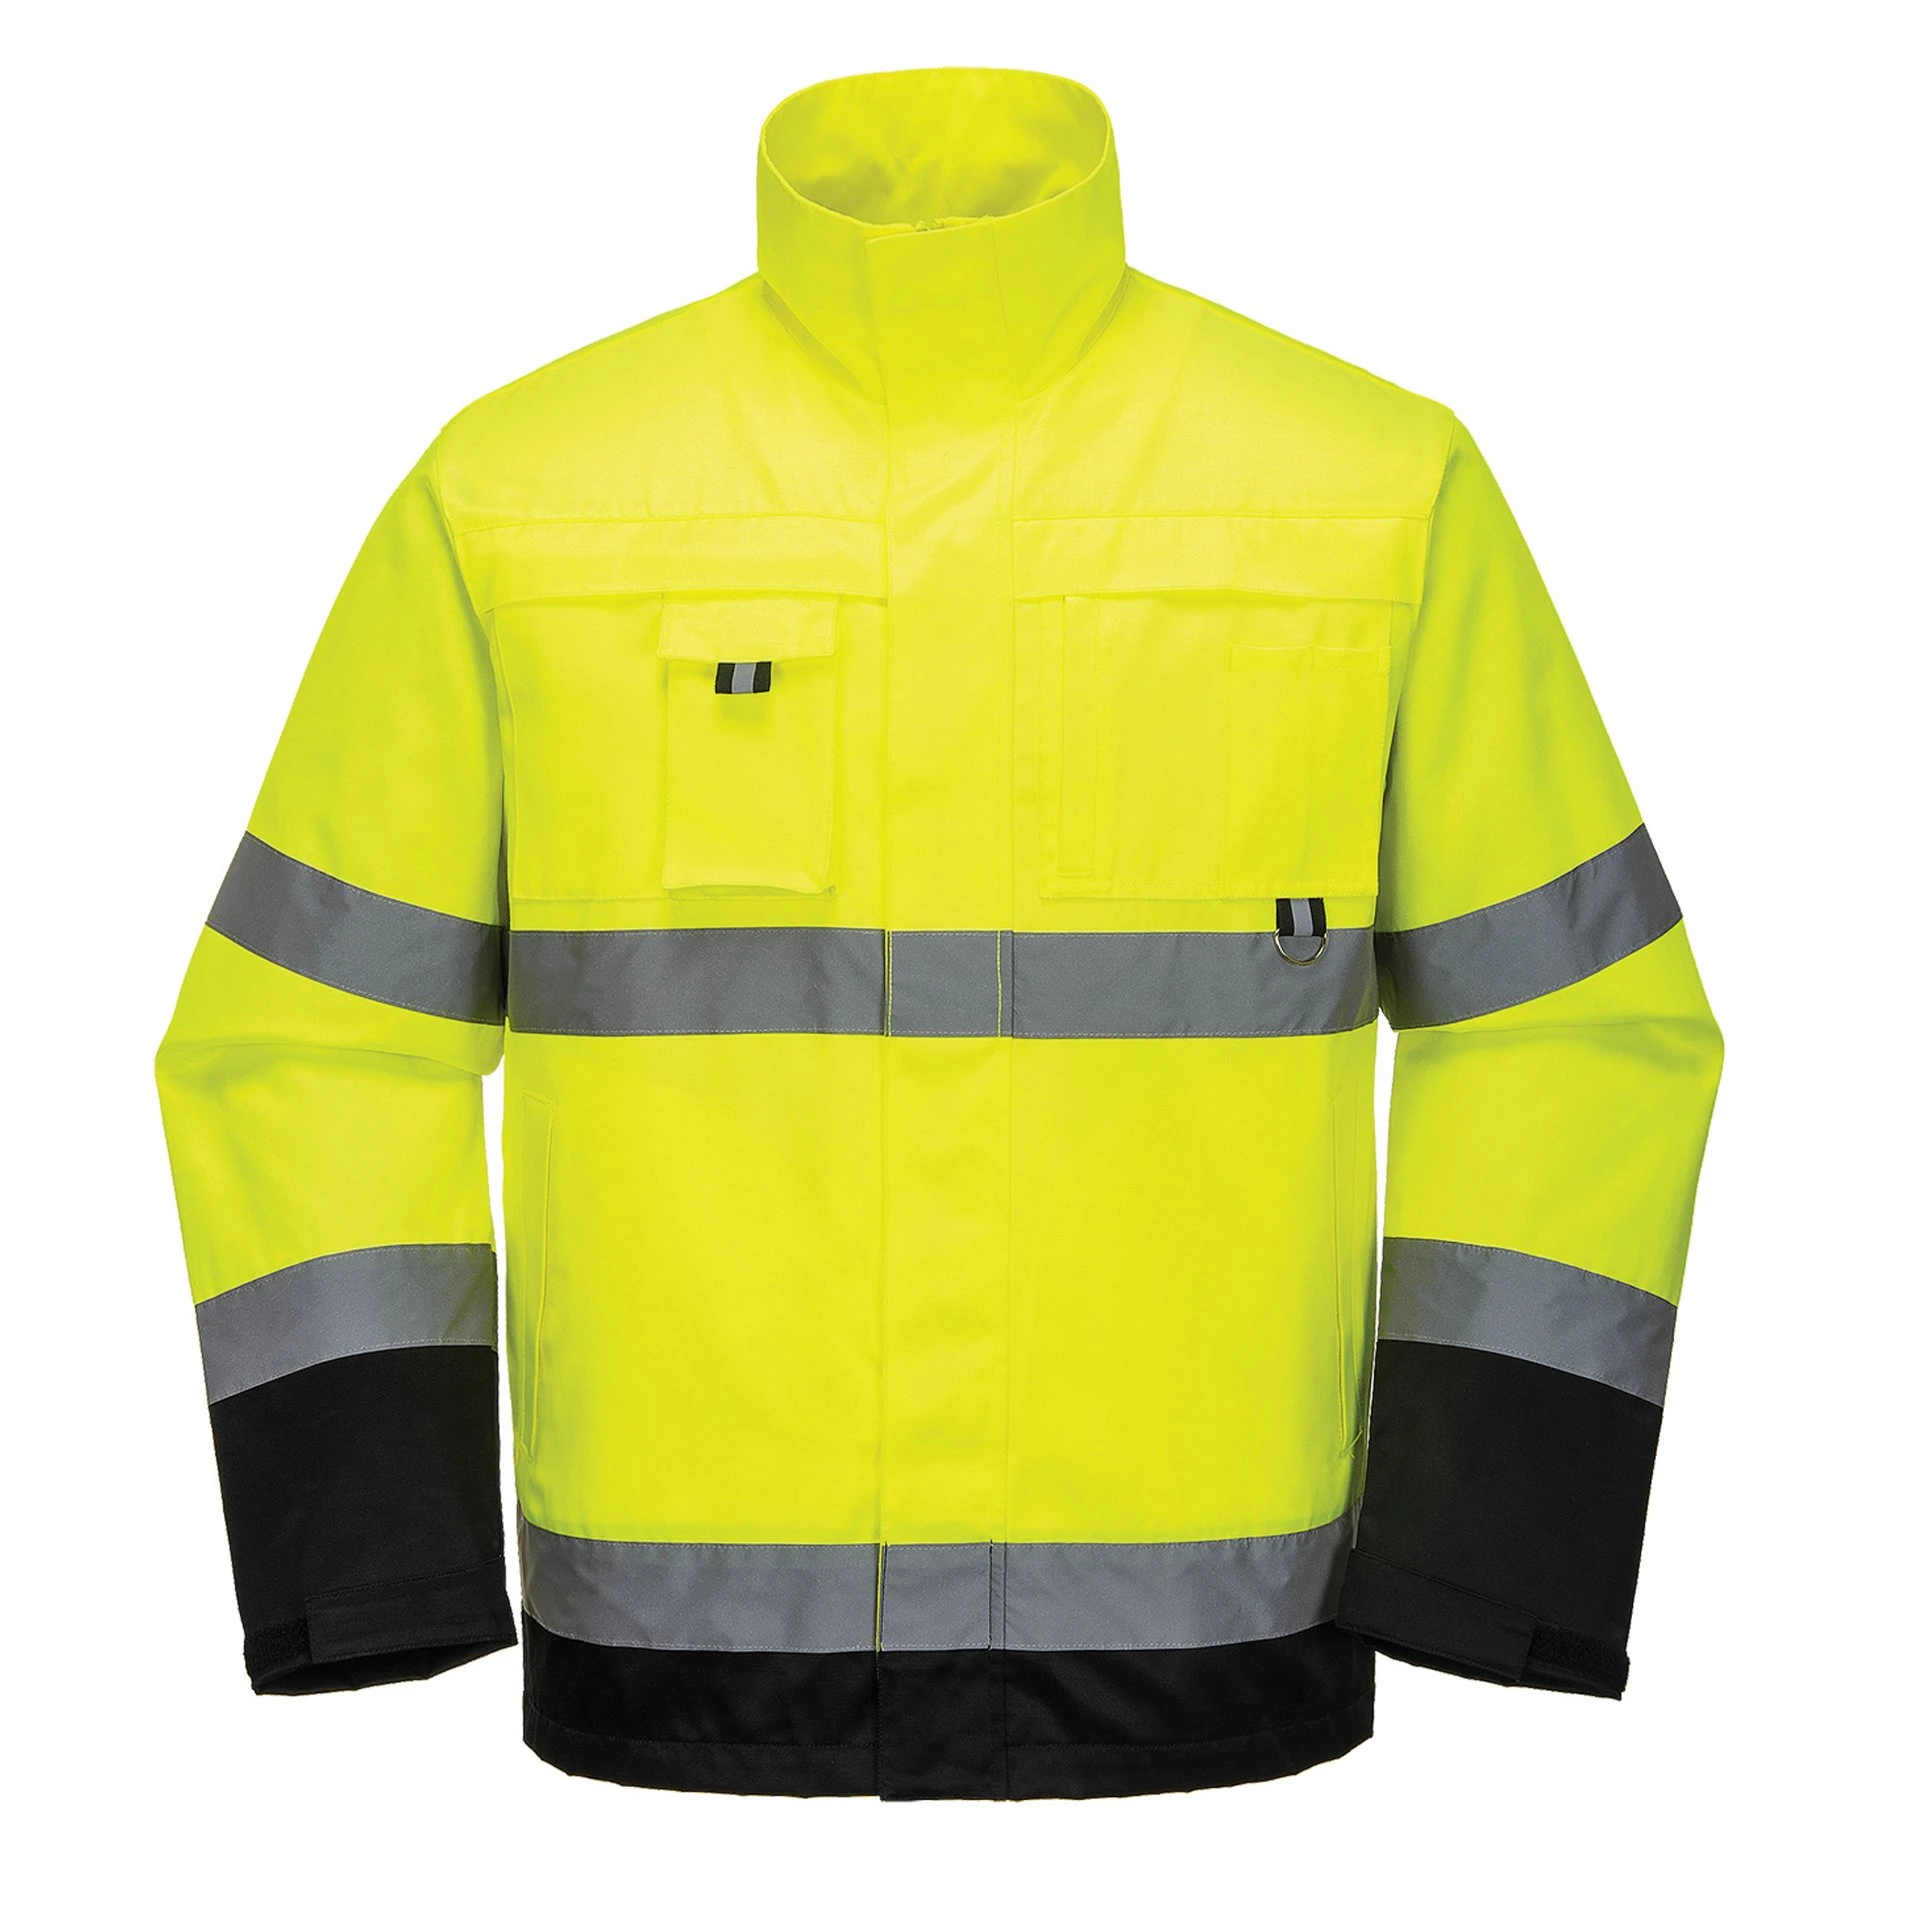 Safety Fast Delivery Jacket